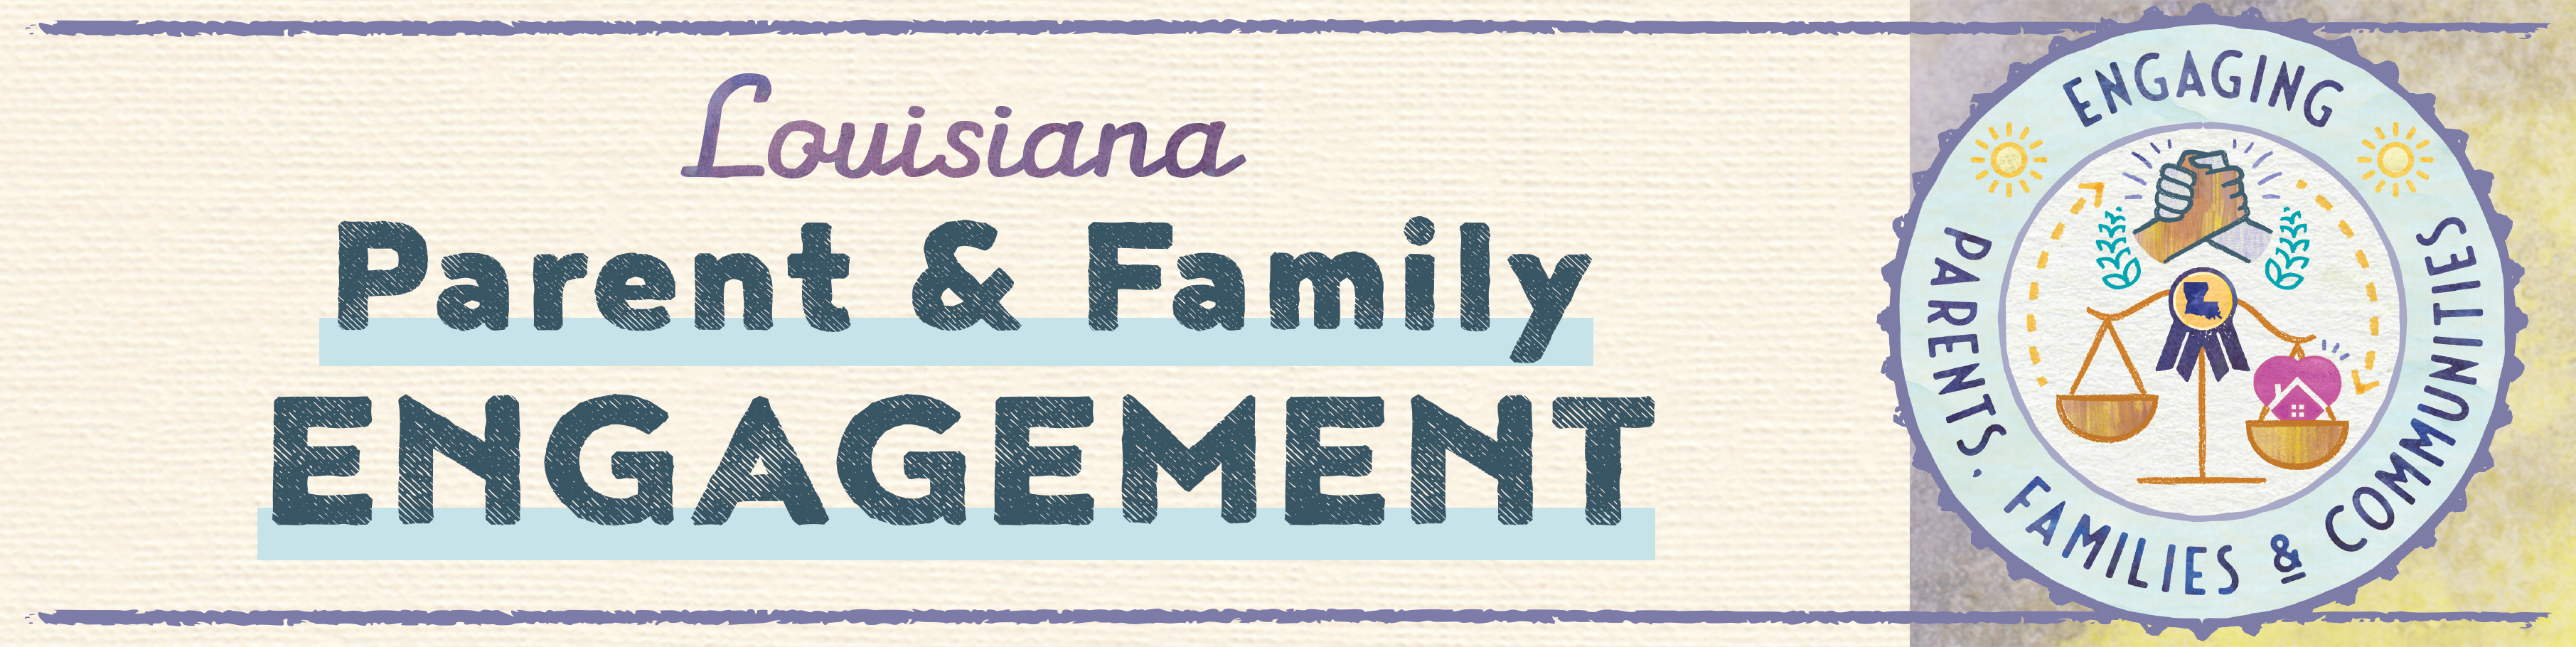 Be Engaged. Louisiana - Engaging Parents, Families & Communities